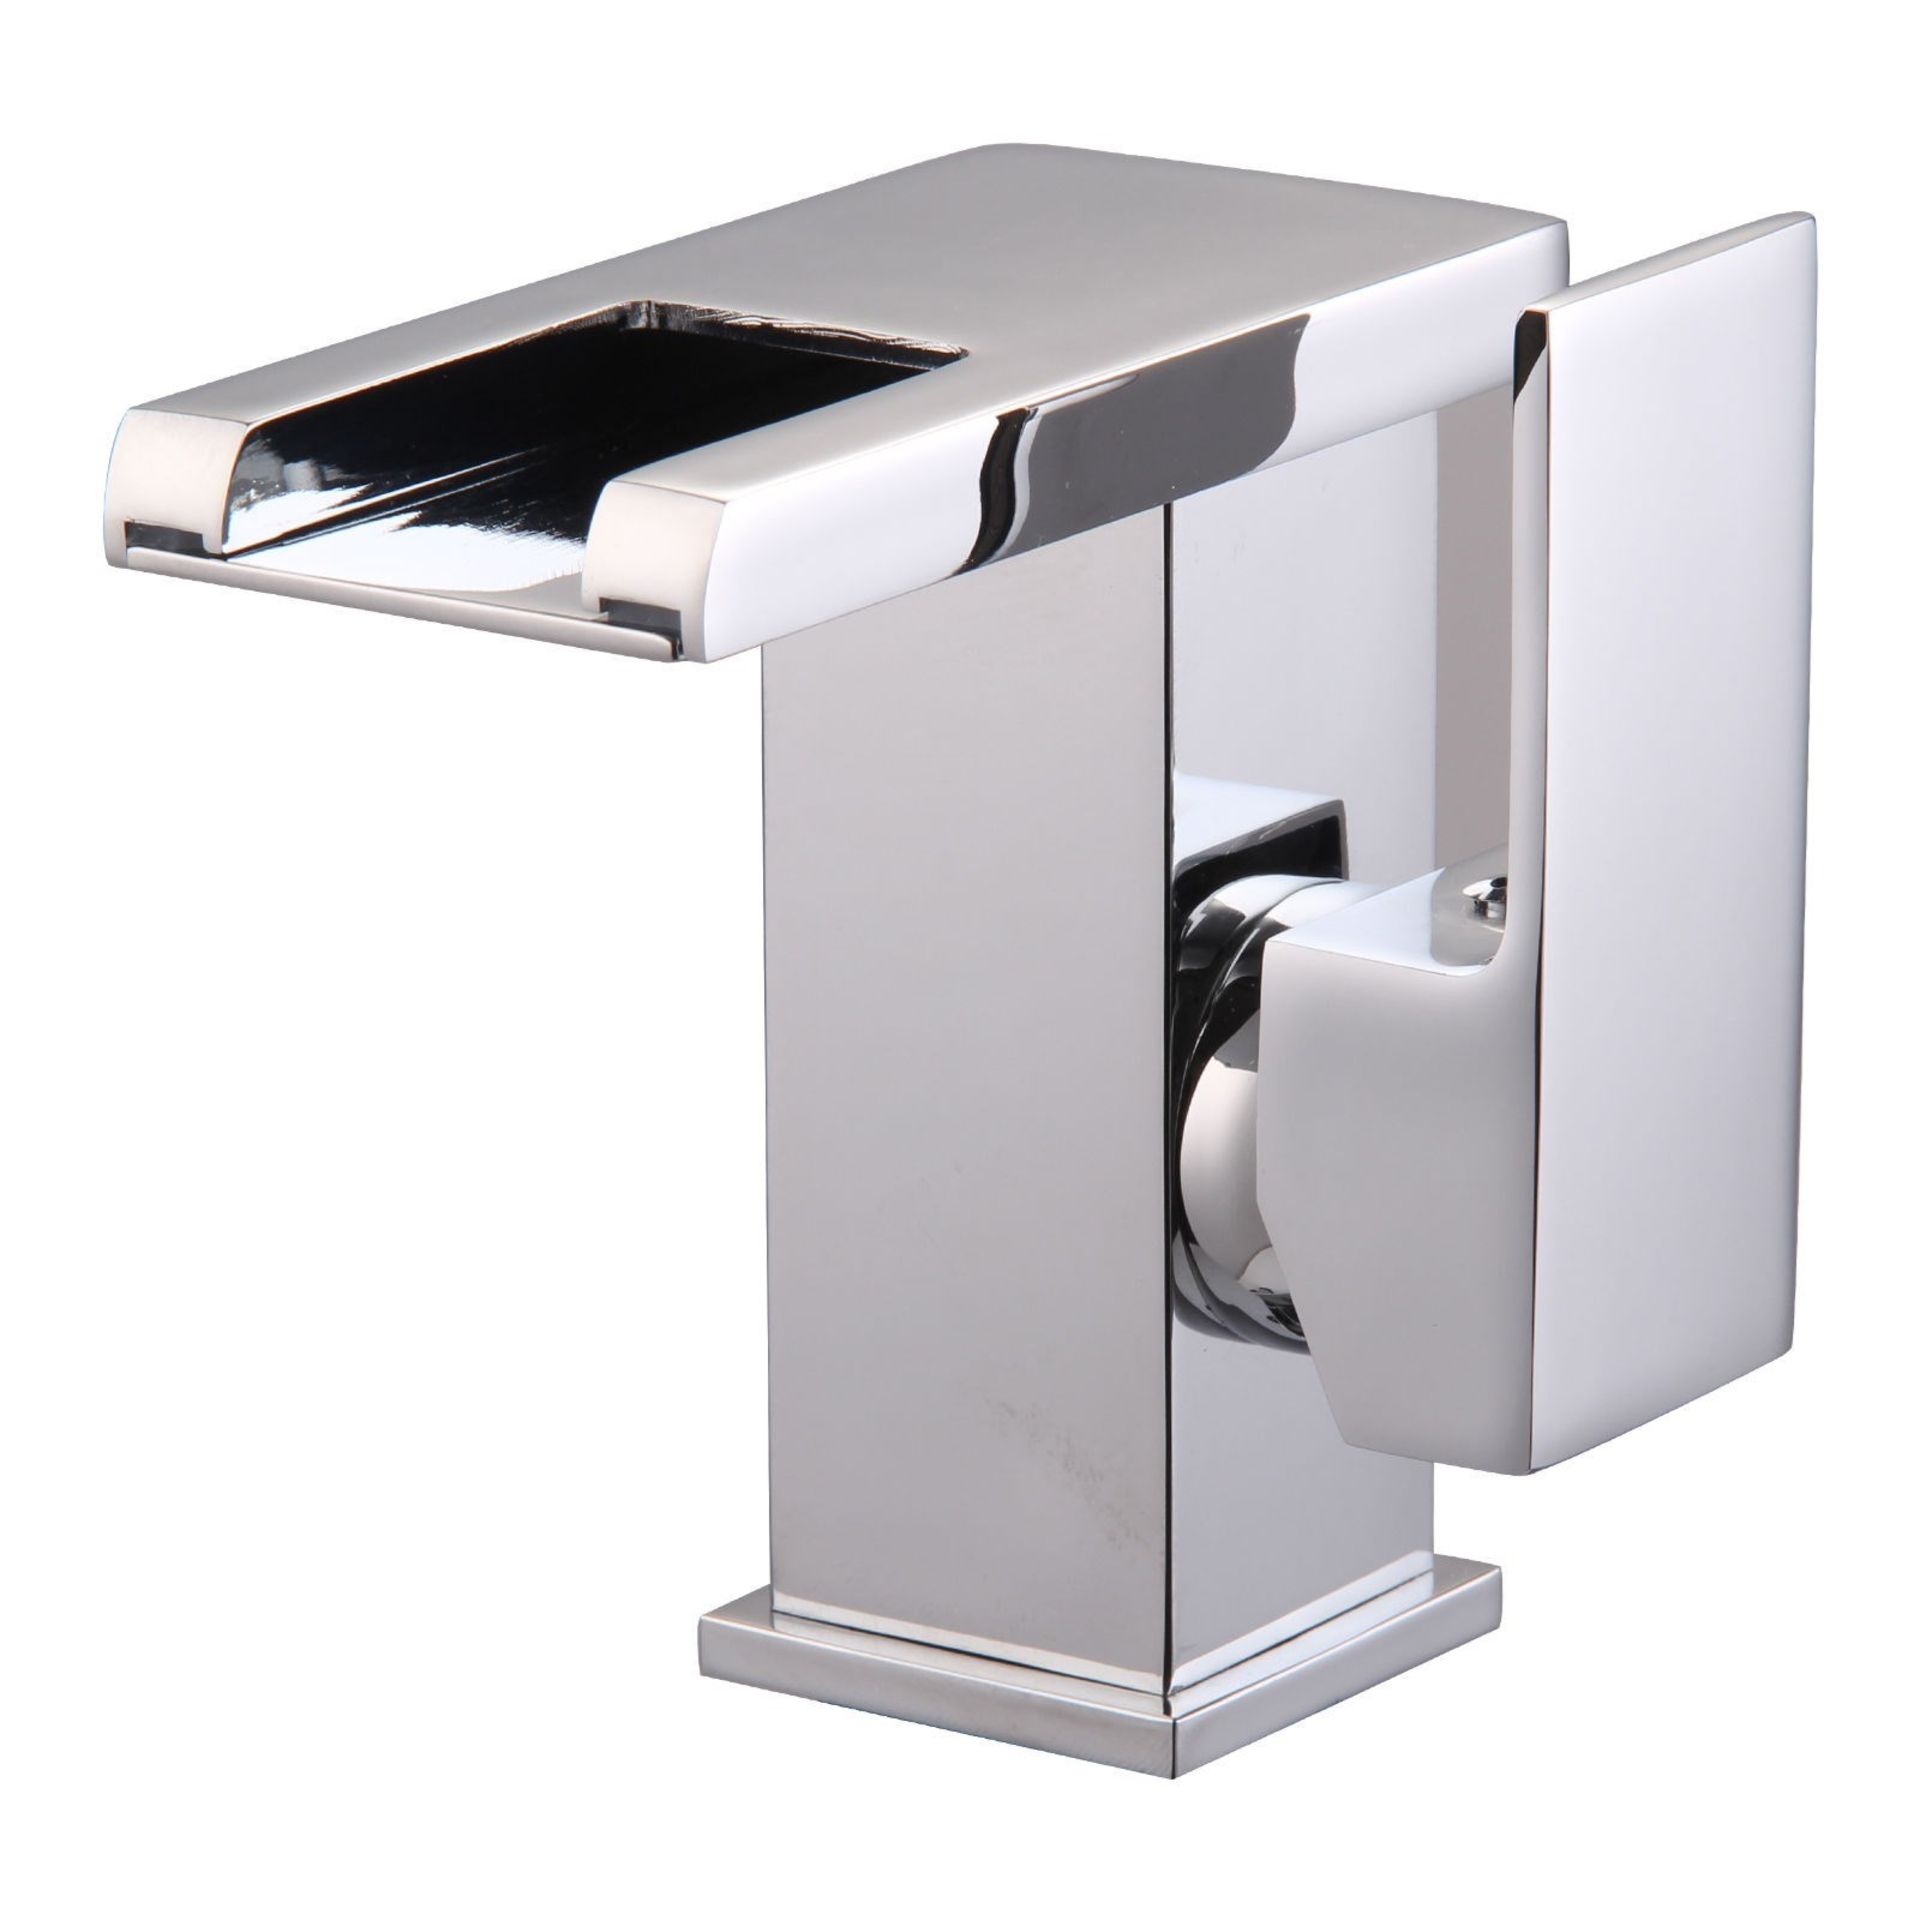 (CT284) LED Waterfall Bathroom Basin Mixer Tap. RRP £229.99. Easy to install and clean. All copper - Image 2 of 3